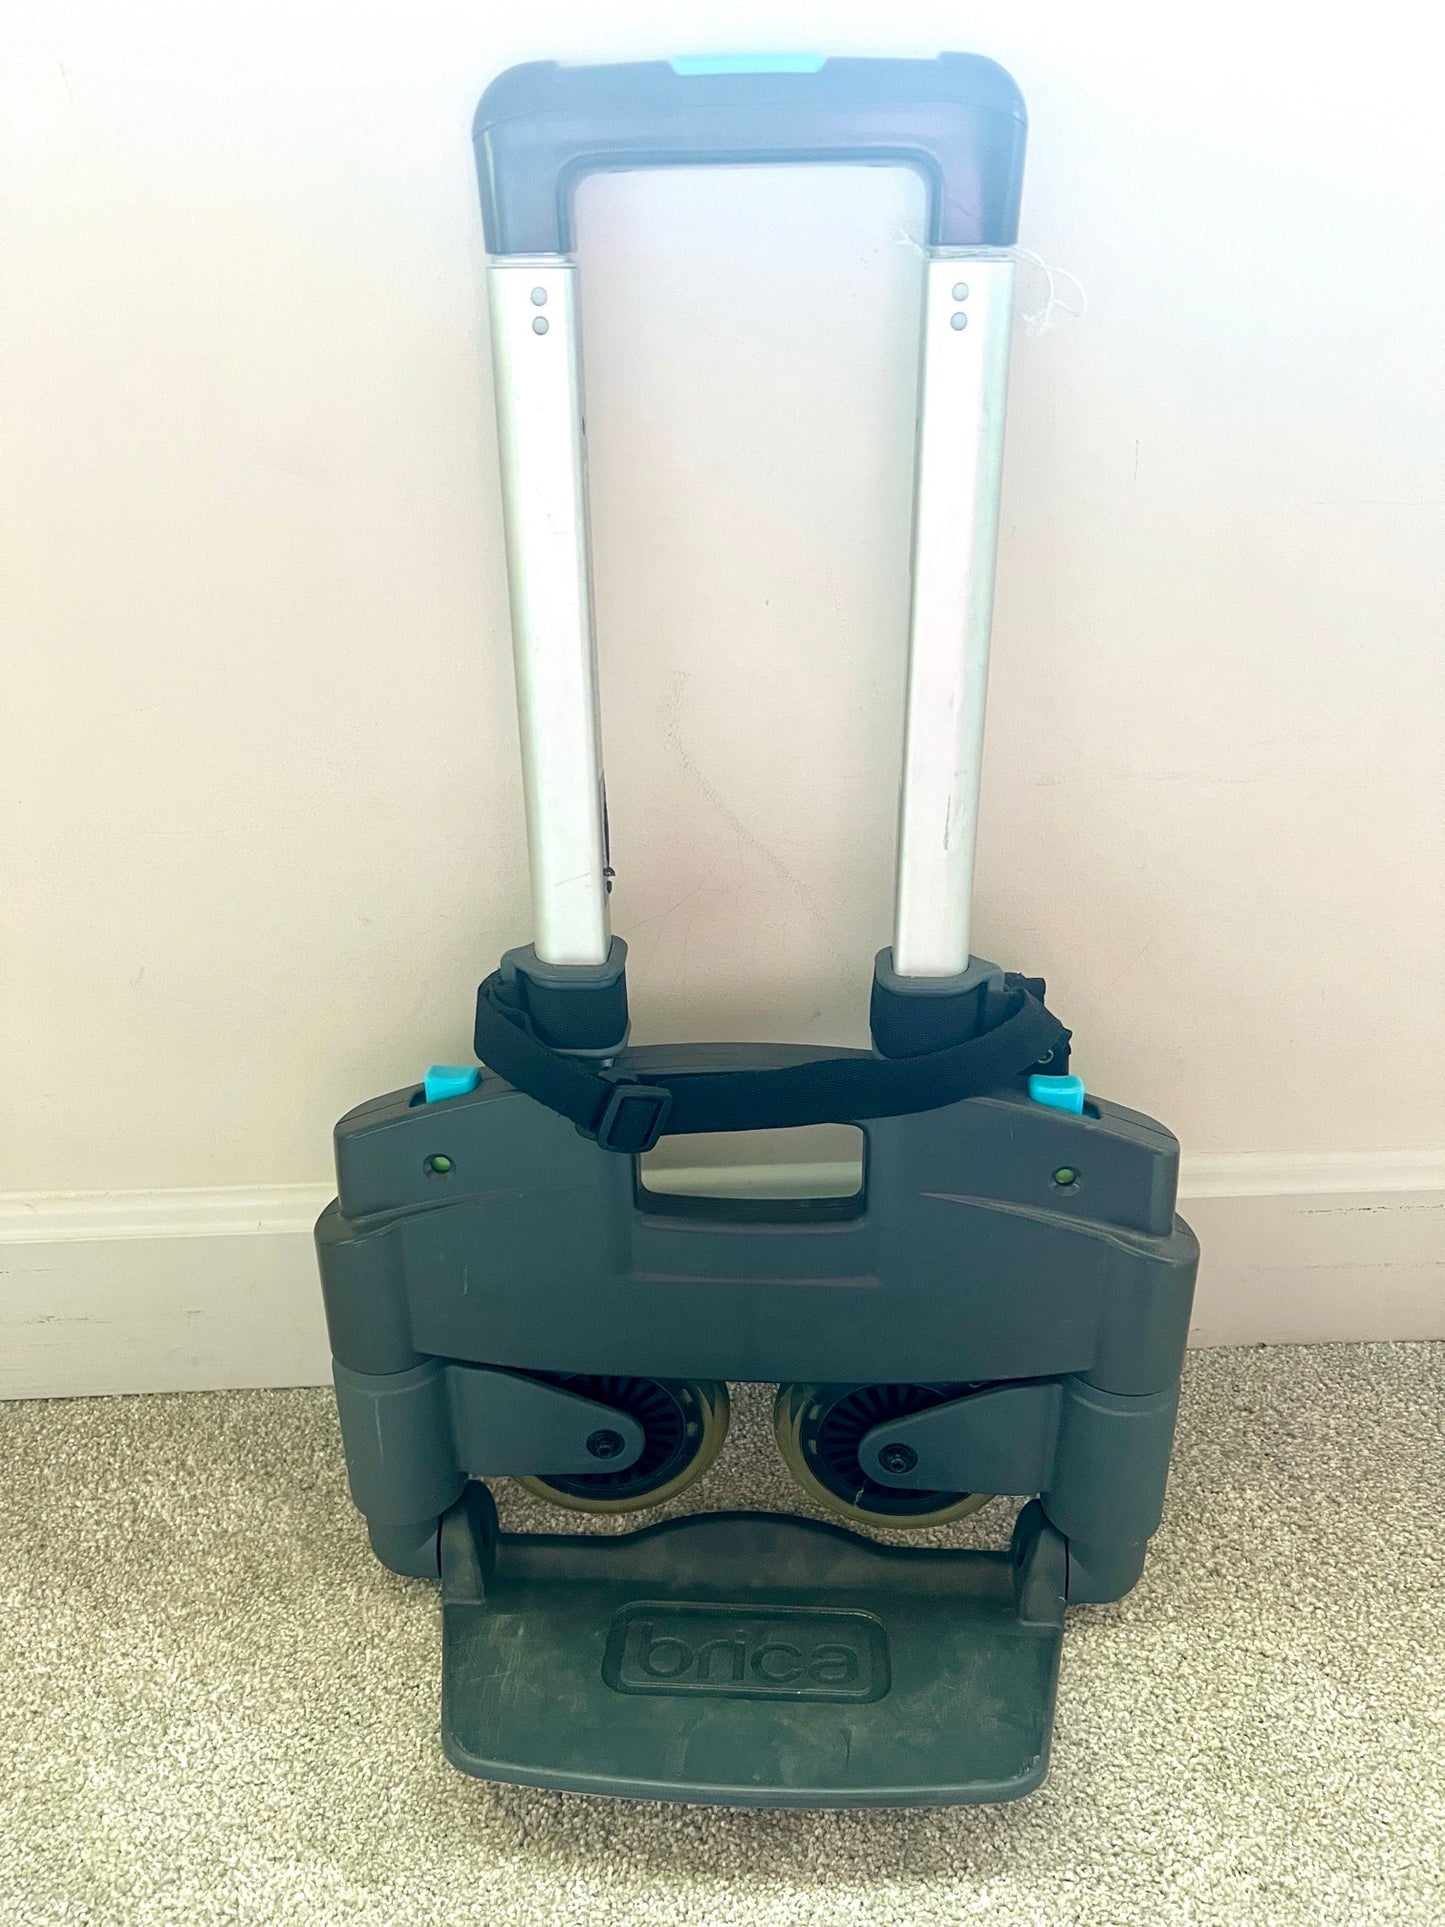 Brica car seat carrier for airport